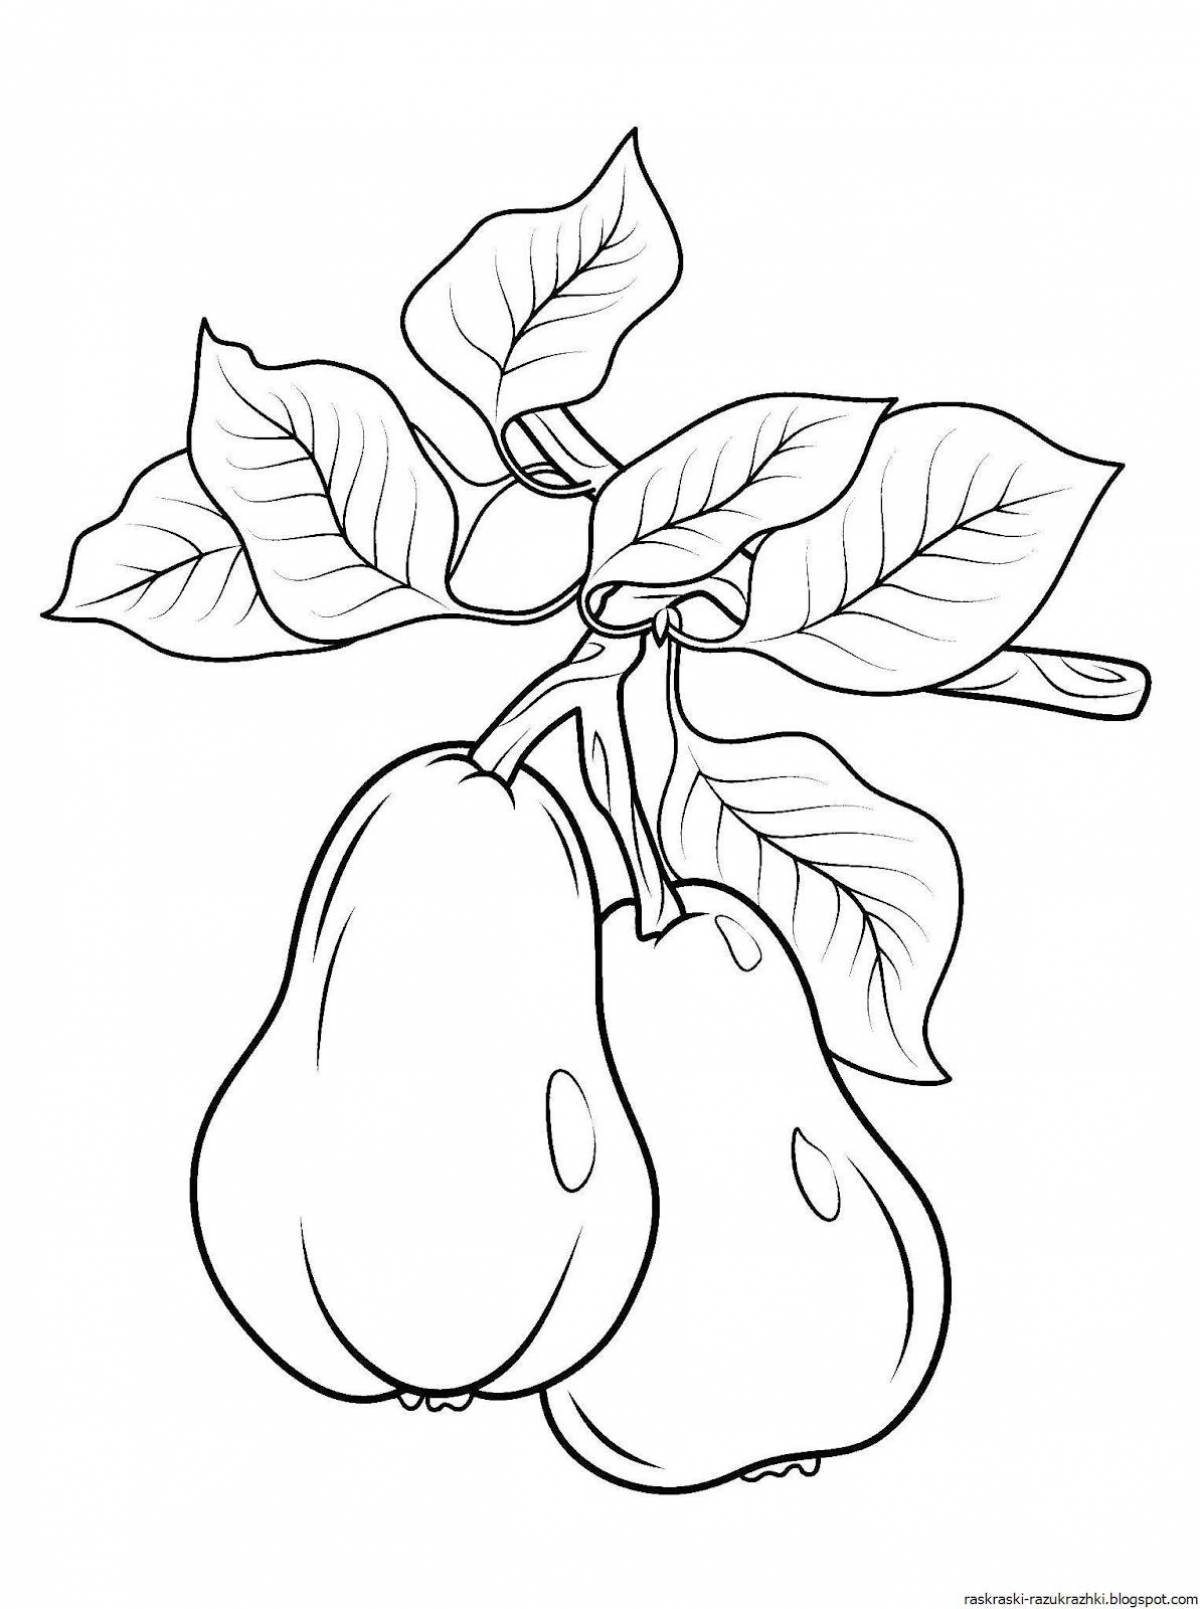 Funny pear coloring book for babies